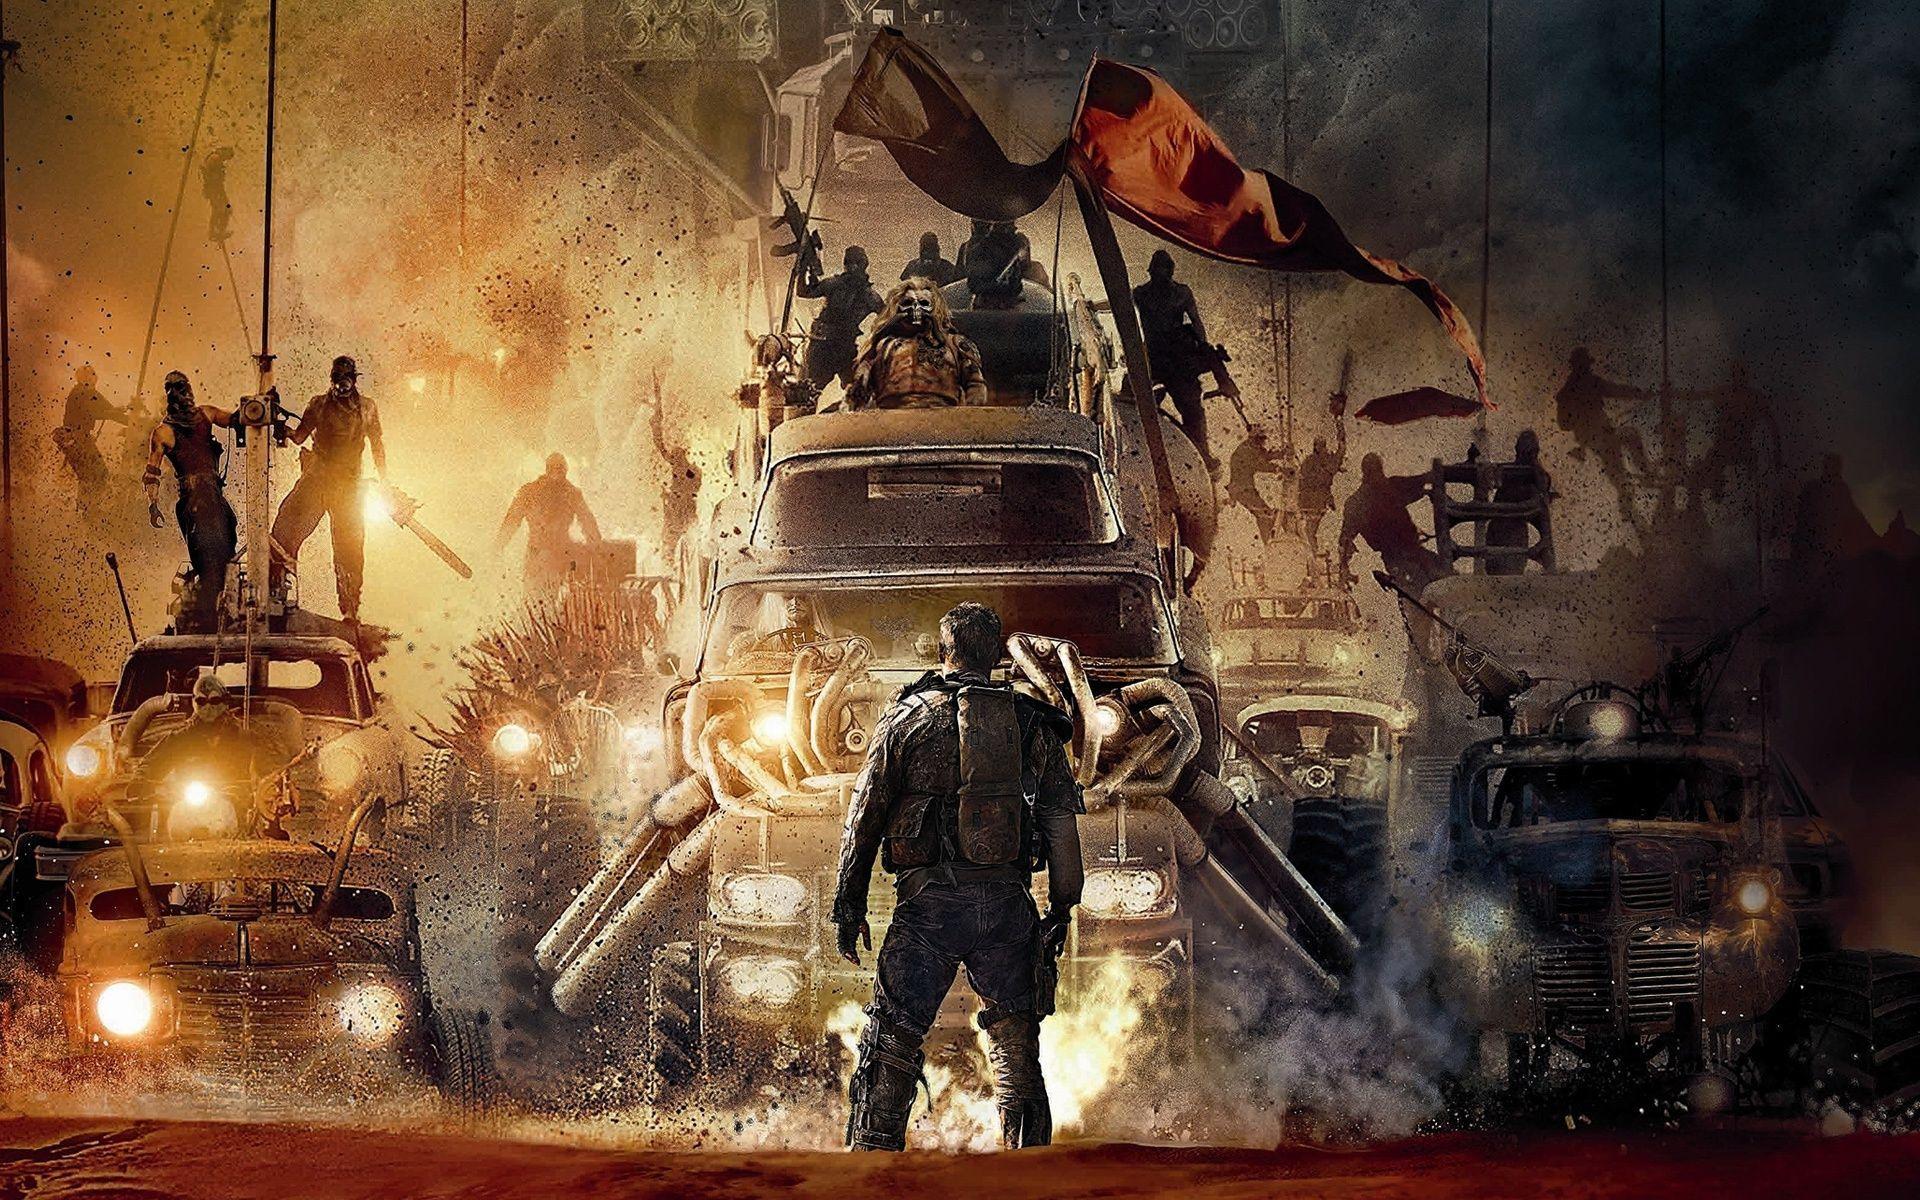 can i purchase mad max fury road 4k for download